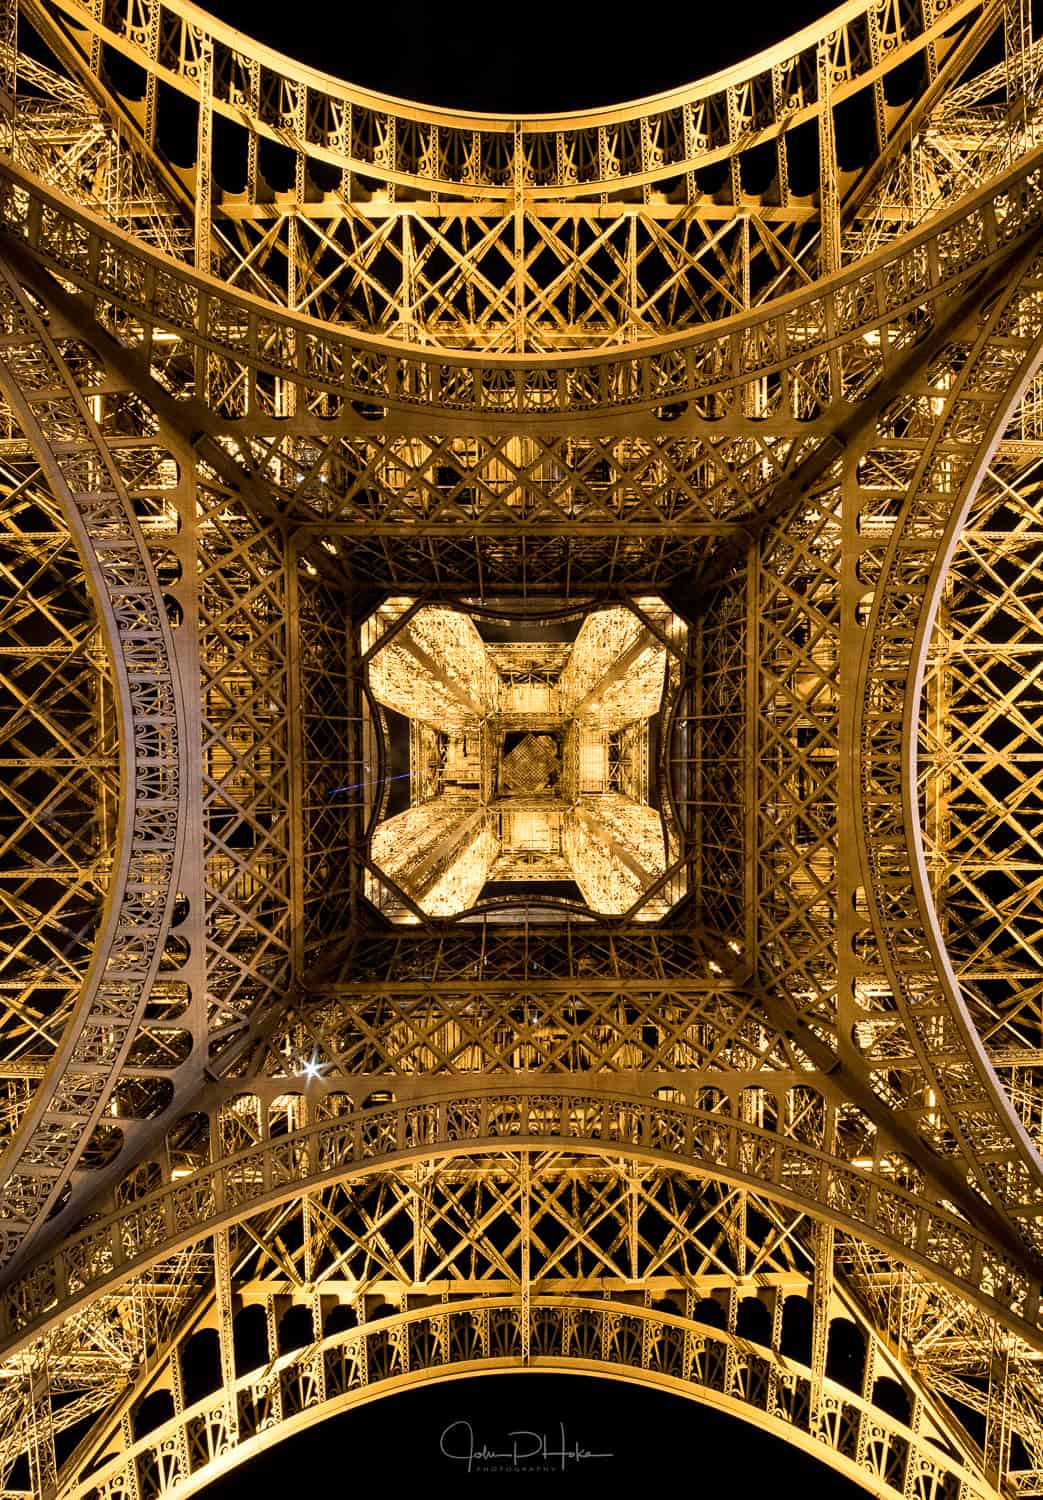 Looking up through the Eiffel Tower at night. Paris, France